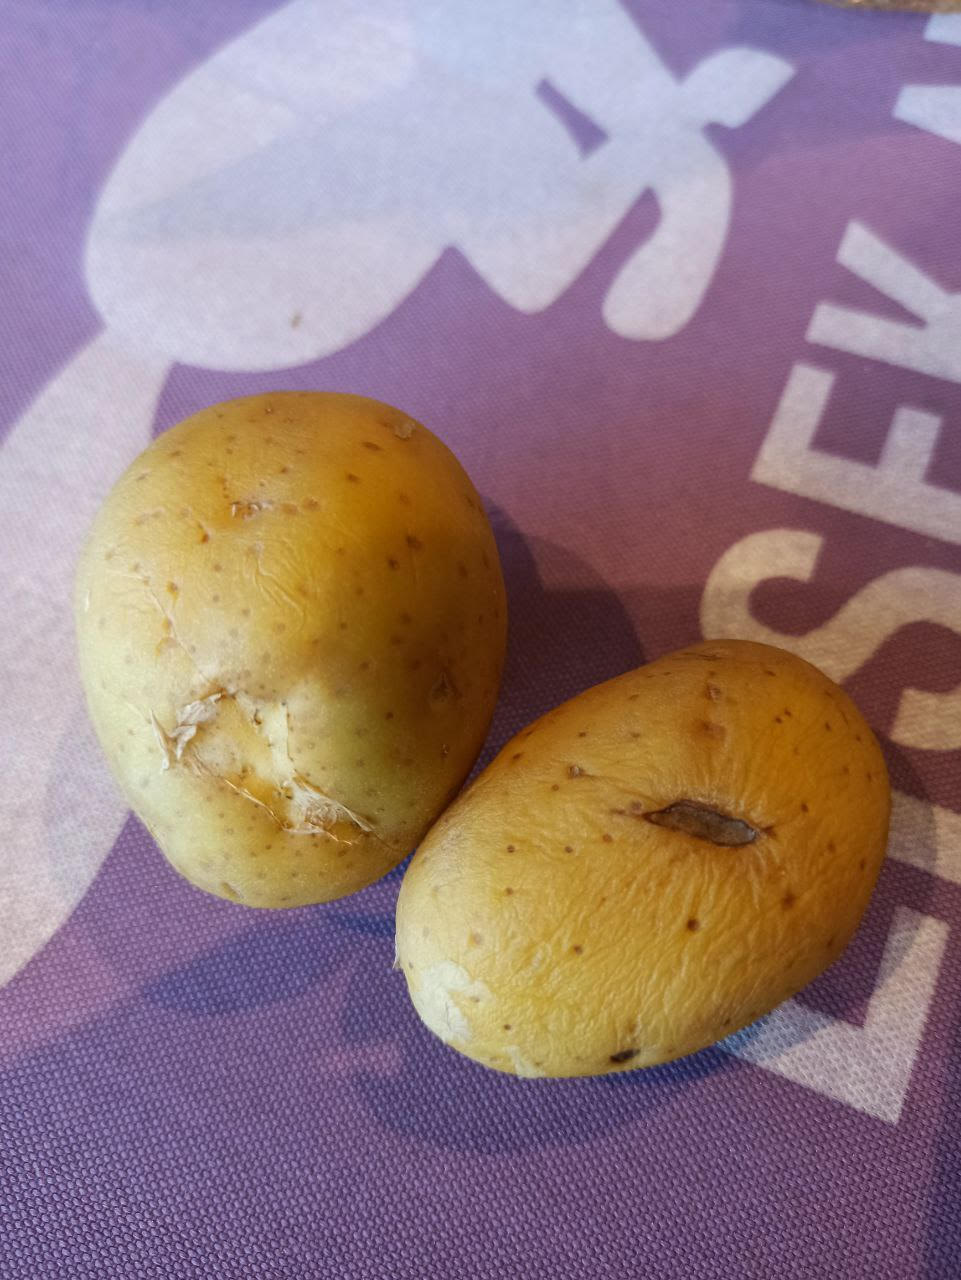 A couple potatoes on a purple surface

Description automatically generated